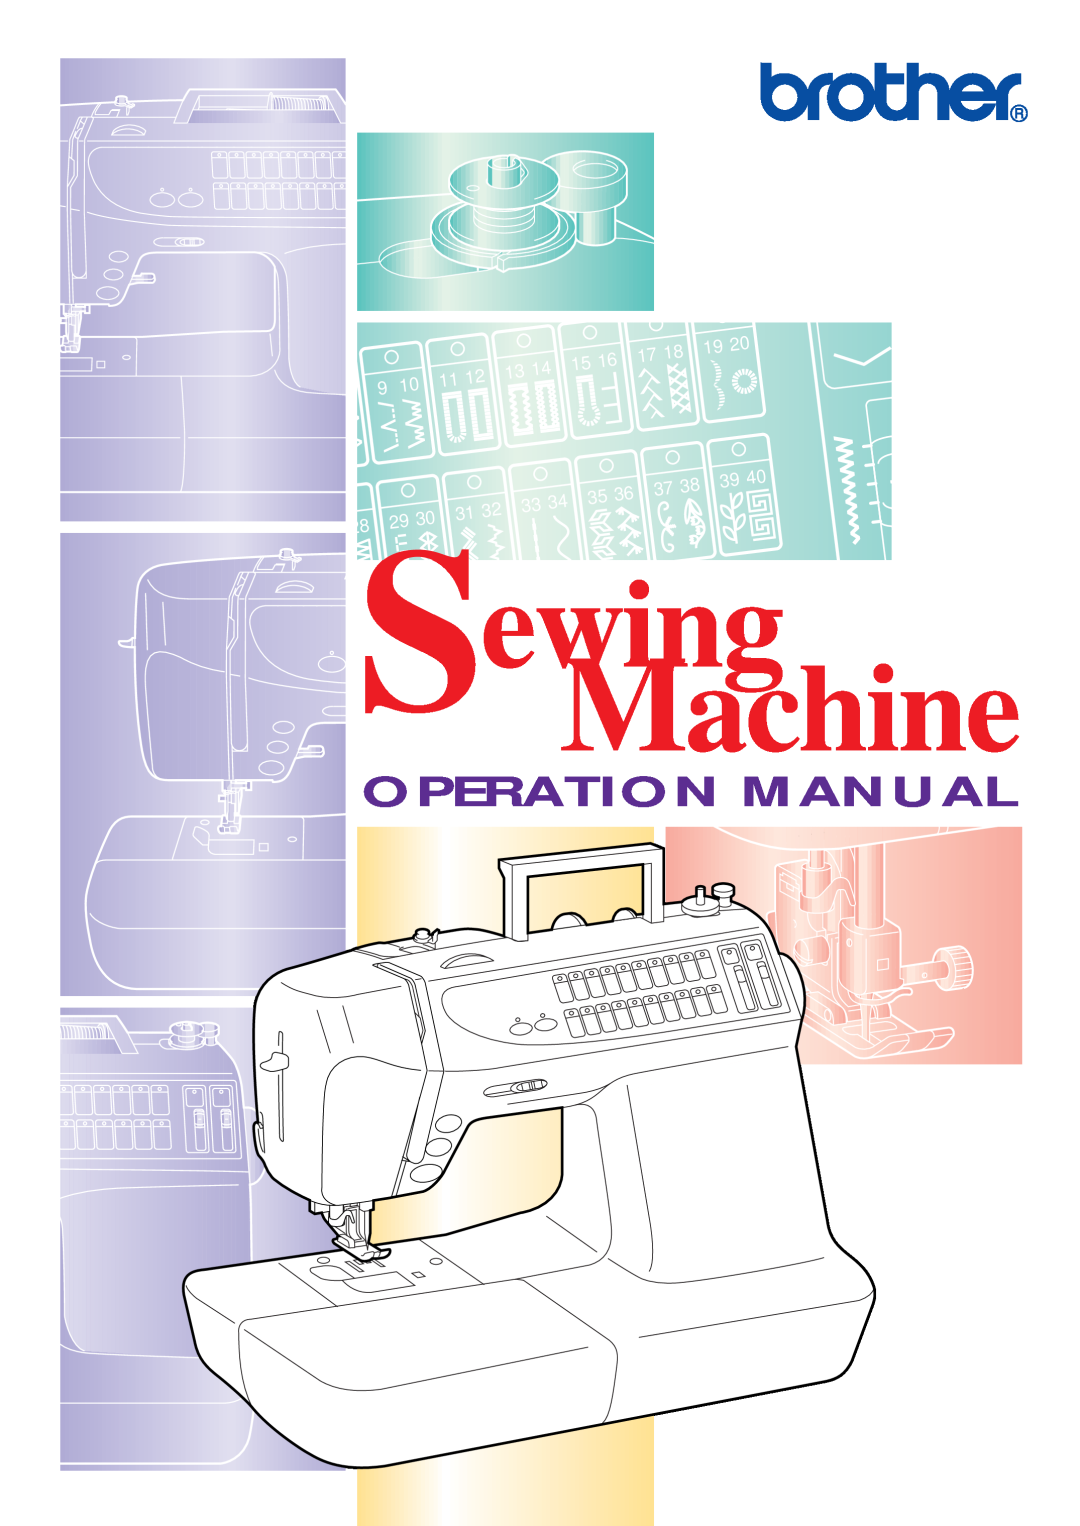 Brother PC-2800 operation manual Sewing Machine, Operation Manual 